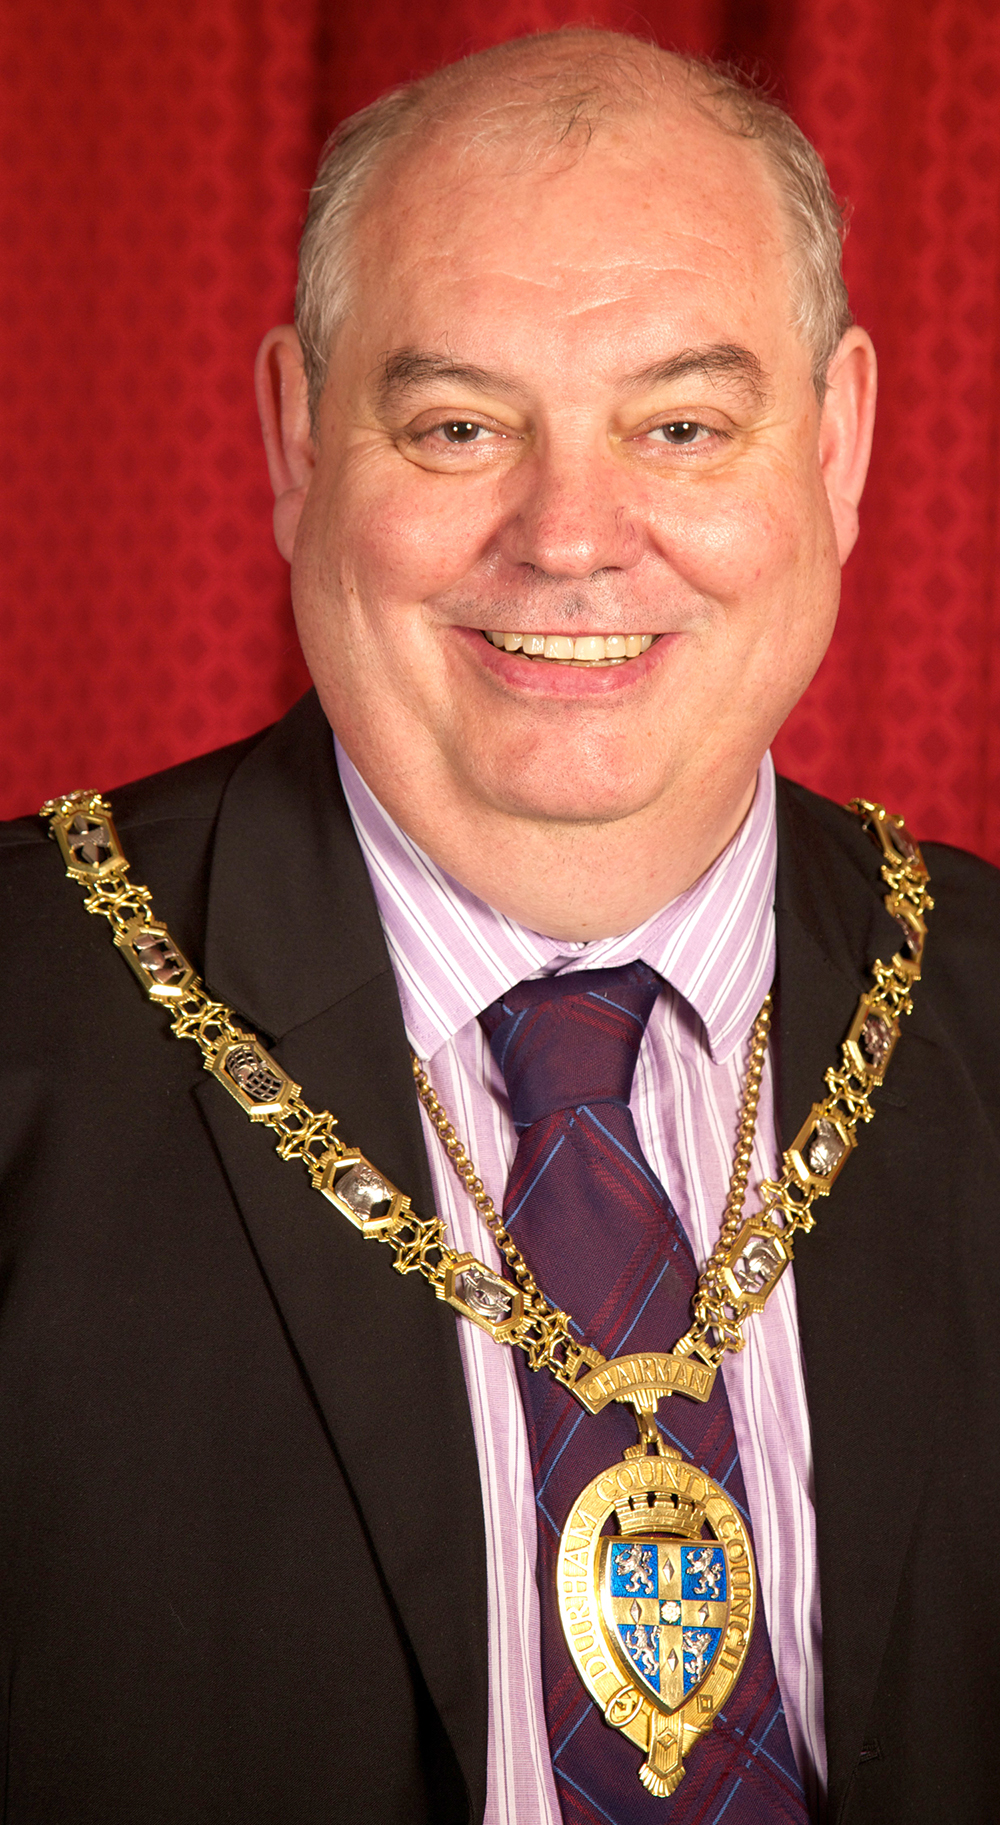 New Year Message from the Chairman of Durham County Council